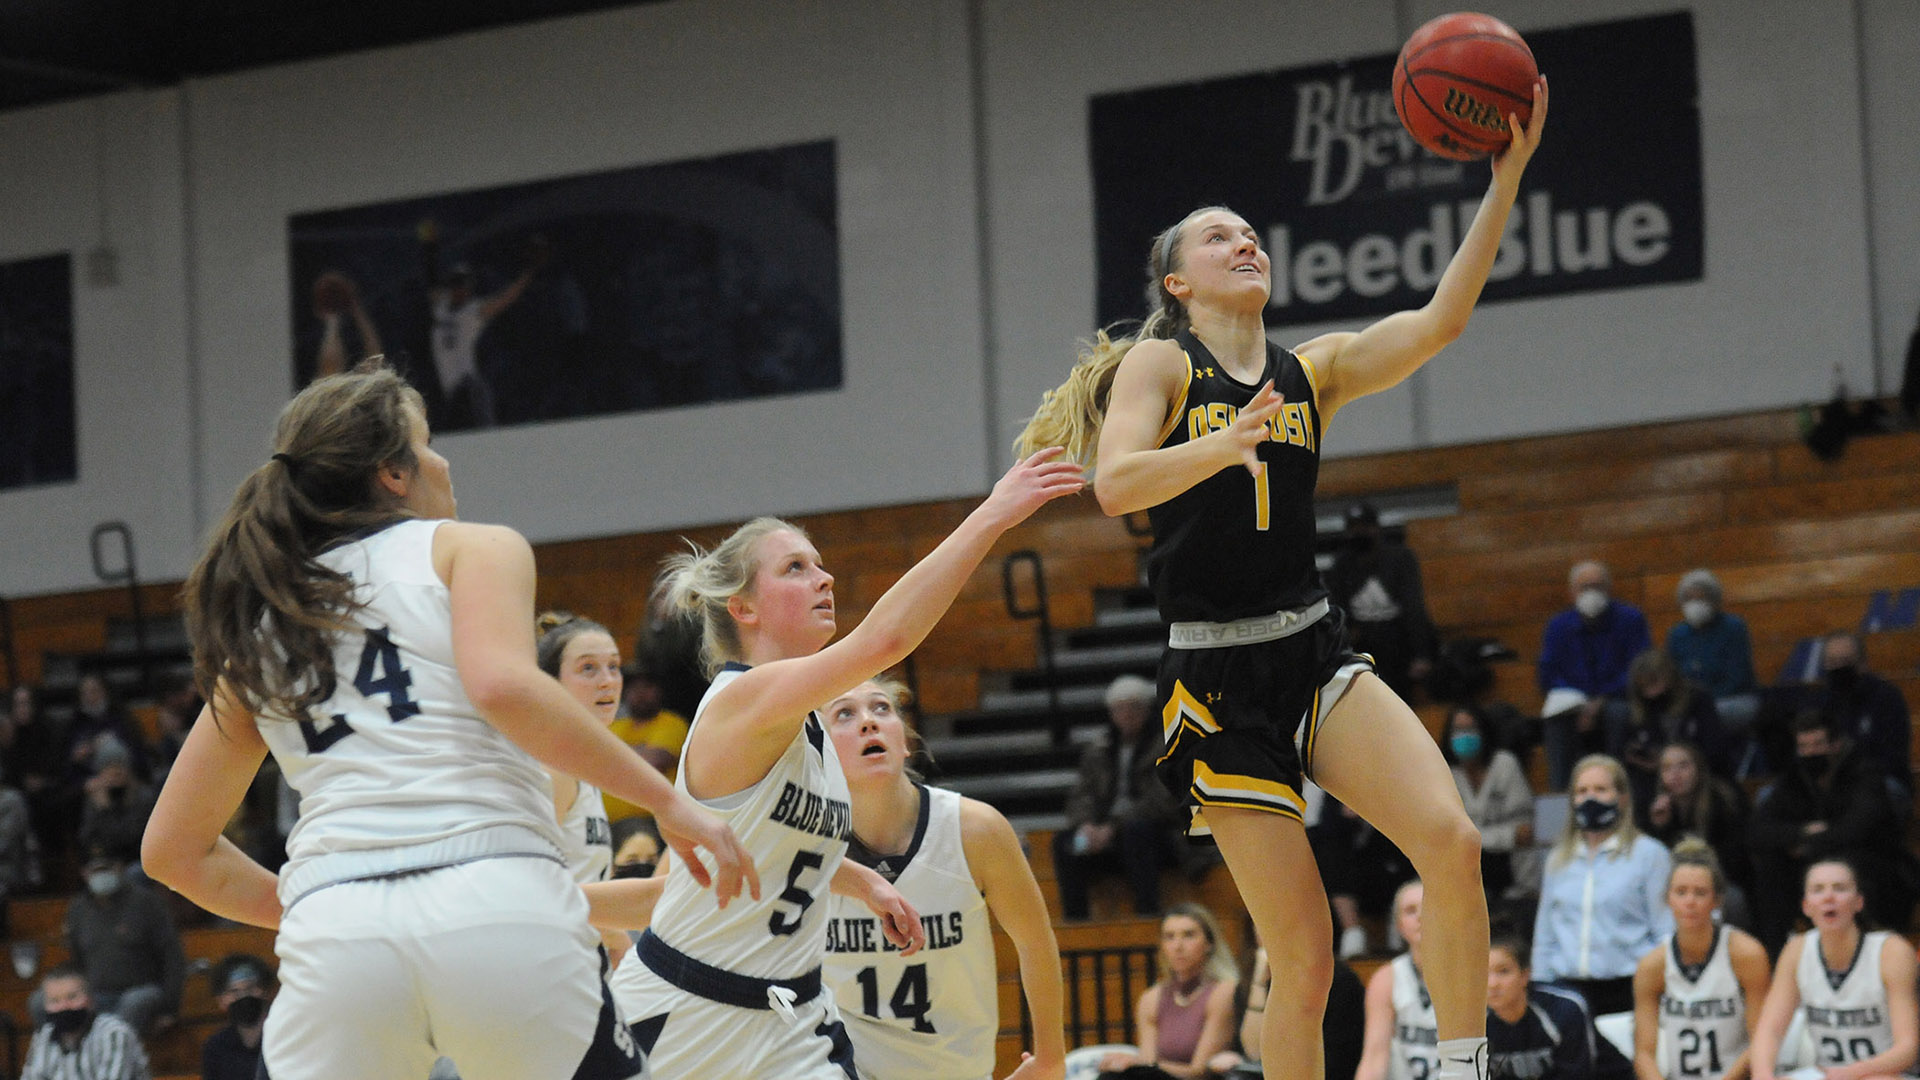 Julia Silloway had eight points, five rebounds and one steal against the Blue Devils.